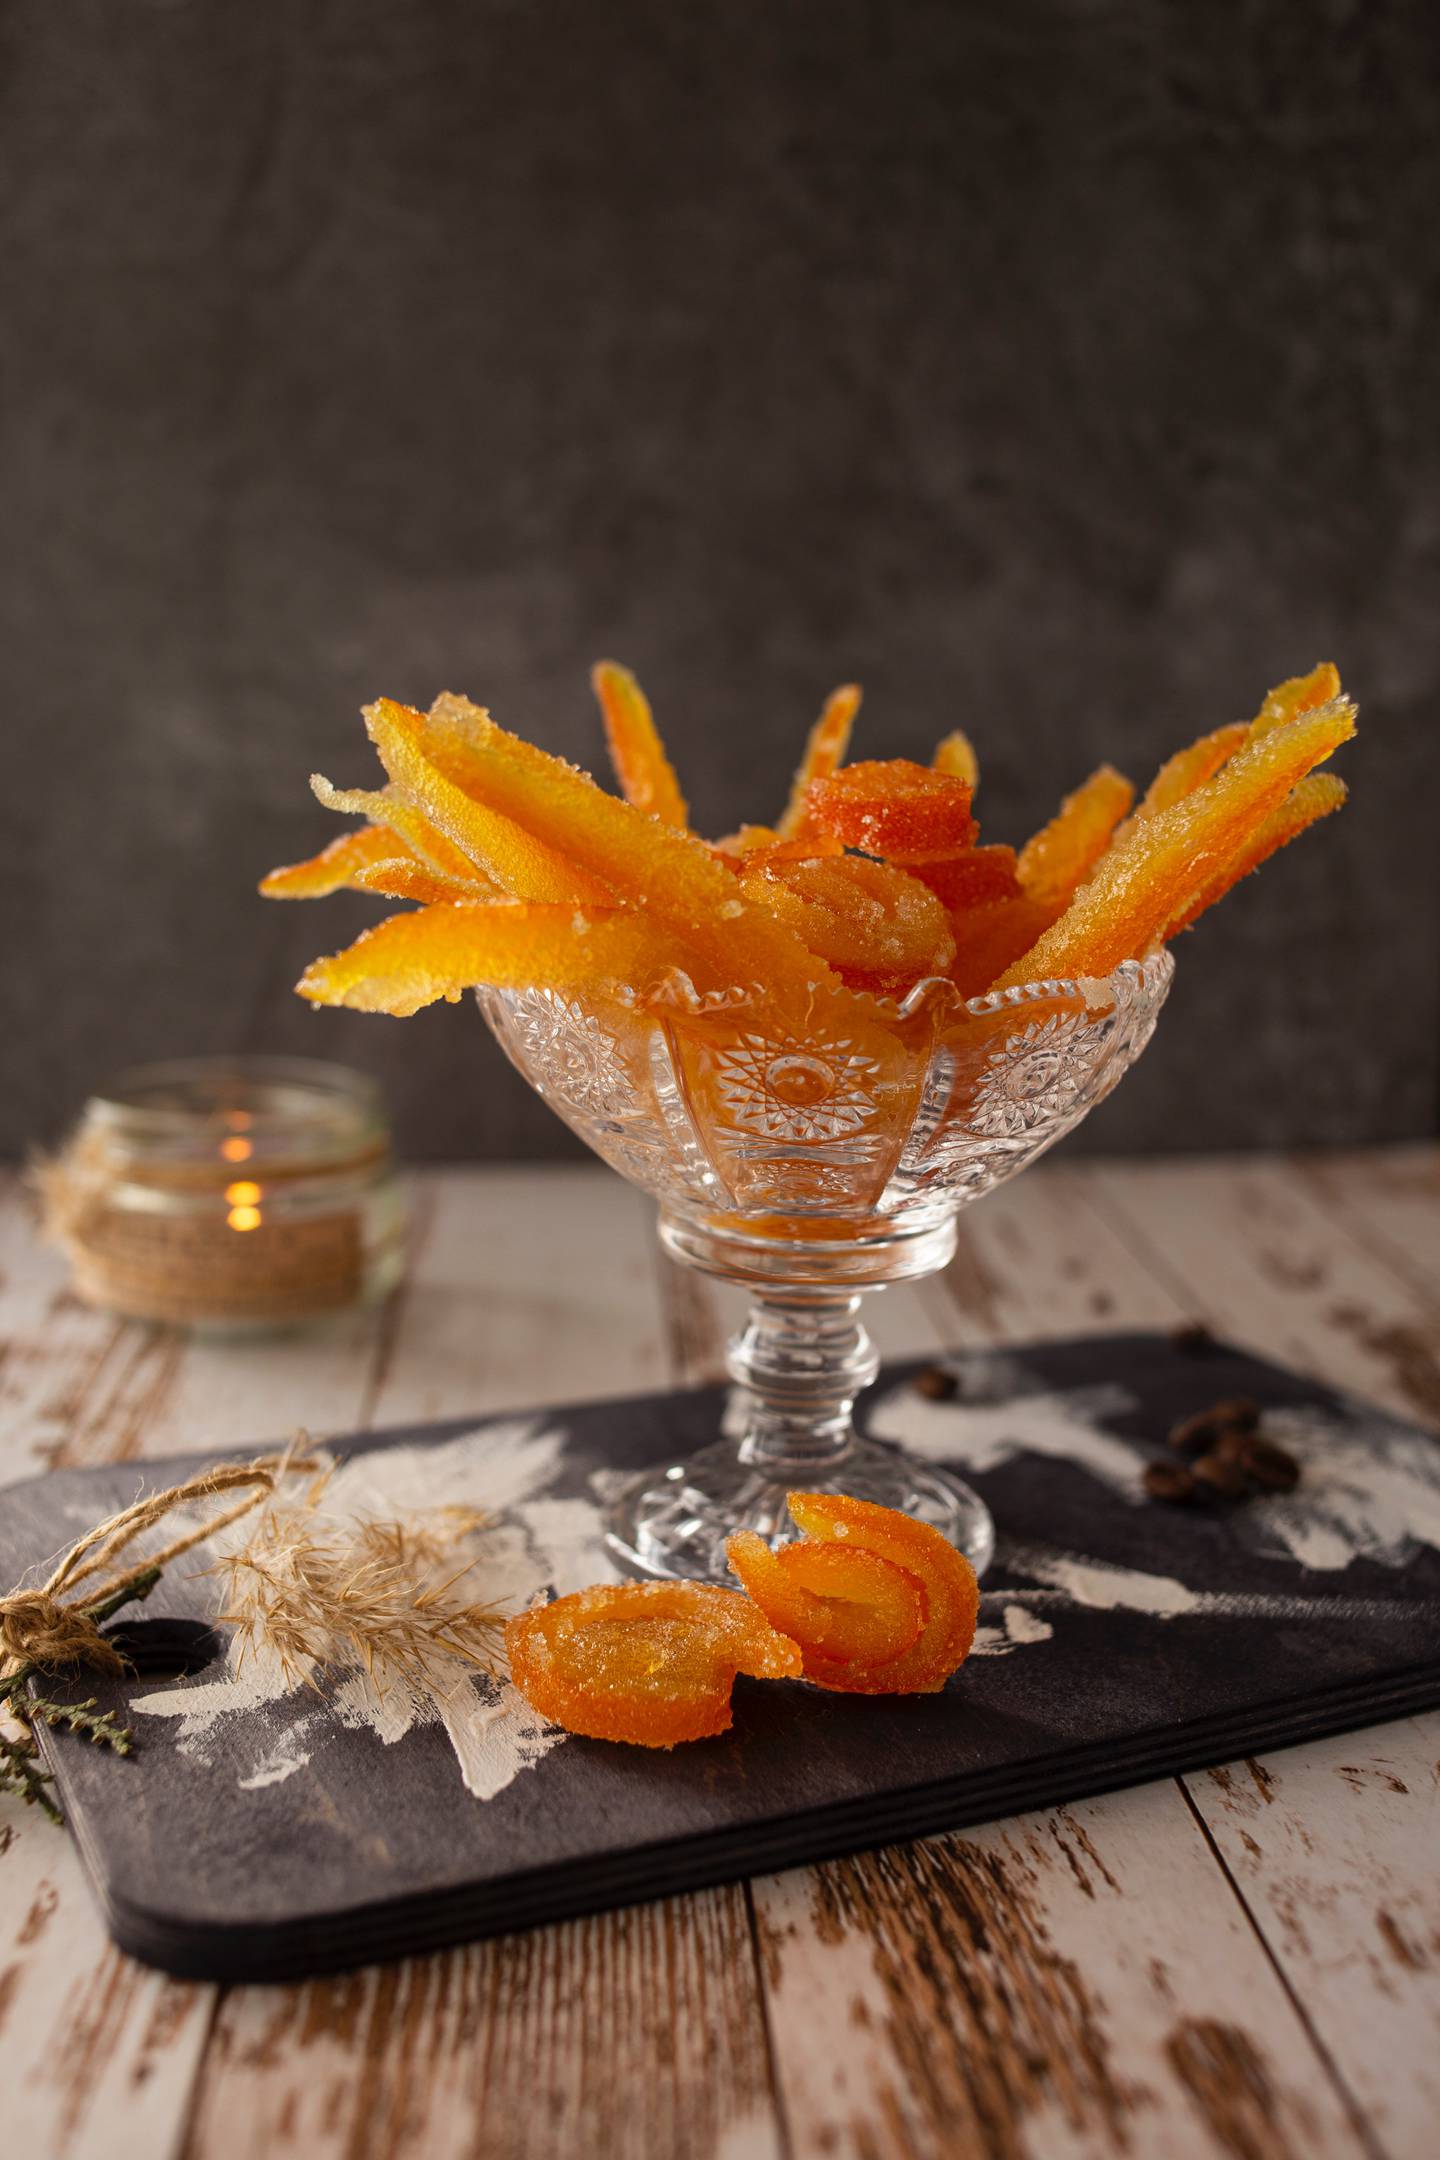 Candied fruit can be soaked in brandy, honey or syrup for this recipe. Photo: Yana Gorbunova / Unsplash